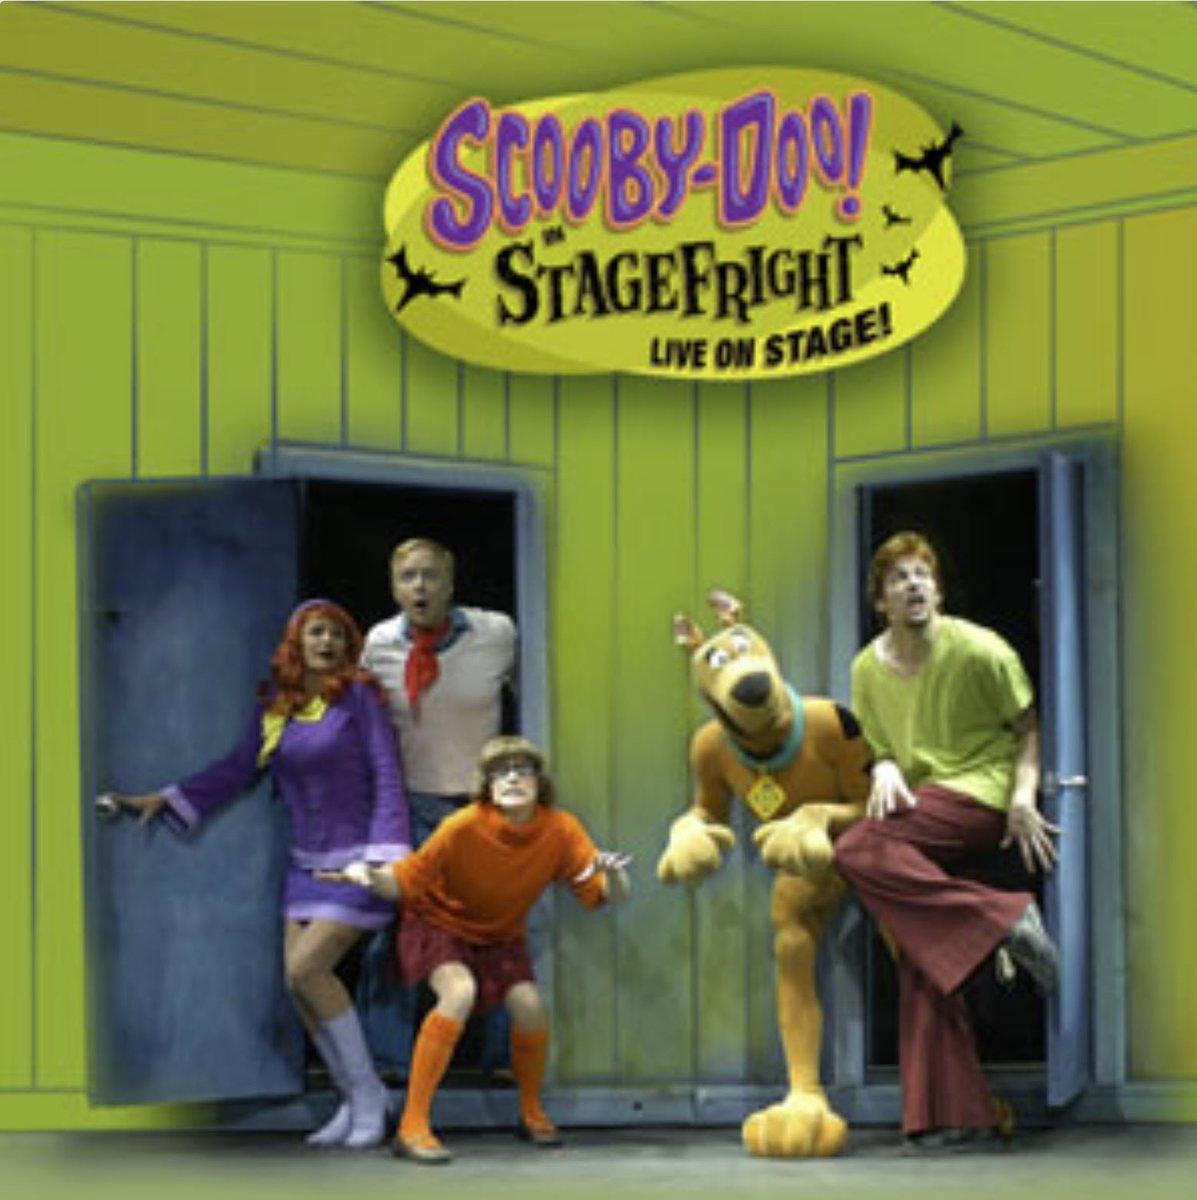 ON THIS DAY... April 30, 2002 - Scooby-Doo in Stagefright, Live on Stage! had it's first performance at the Times-Union Center in Jacksonville, FL. #scoobydoohistory #ScoobyDoo